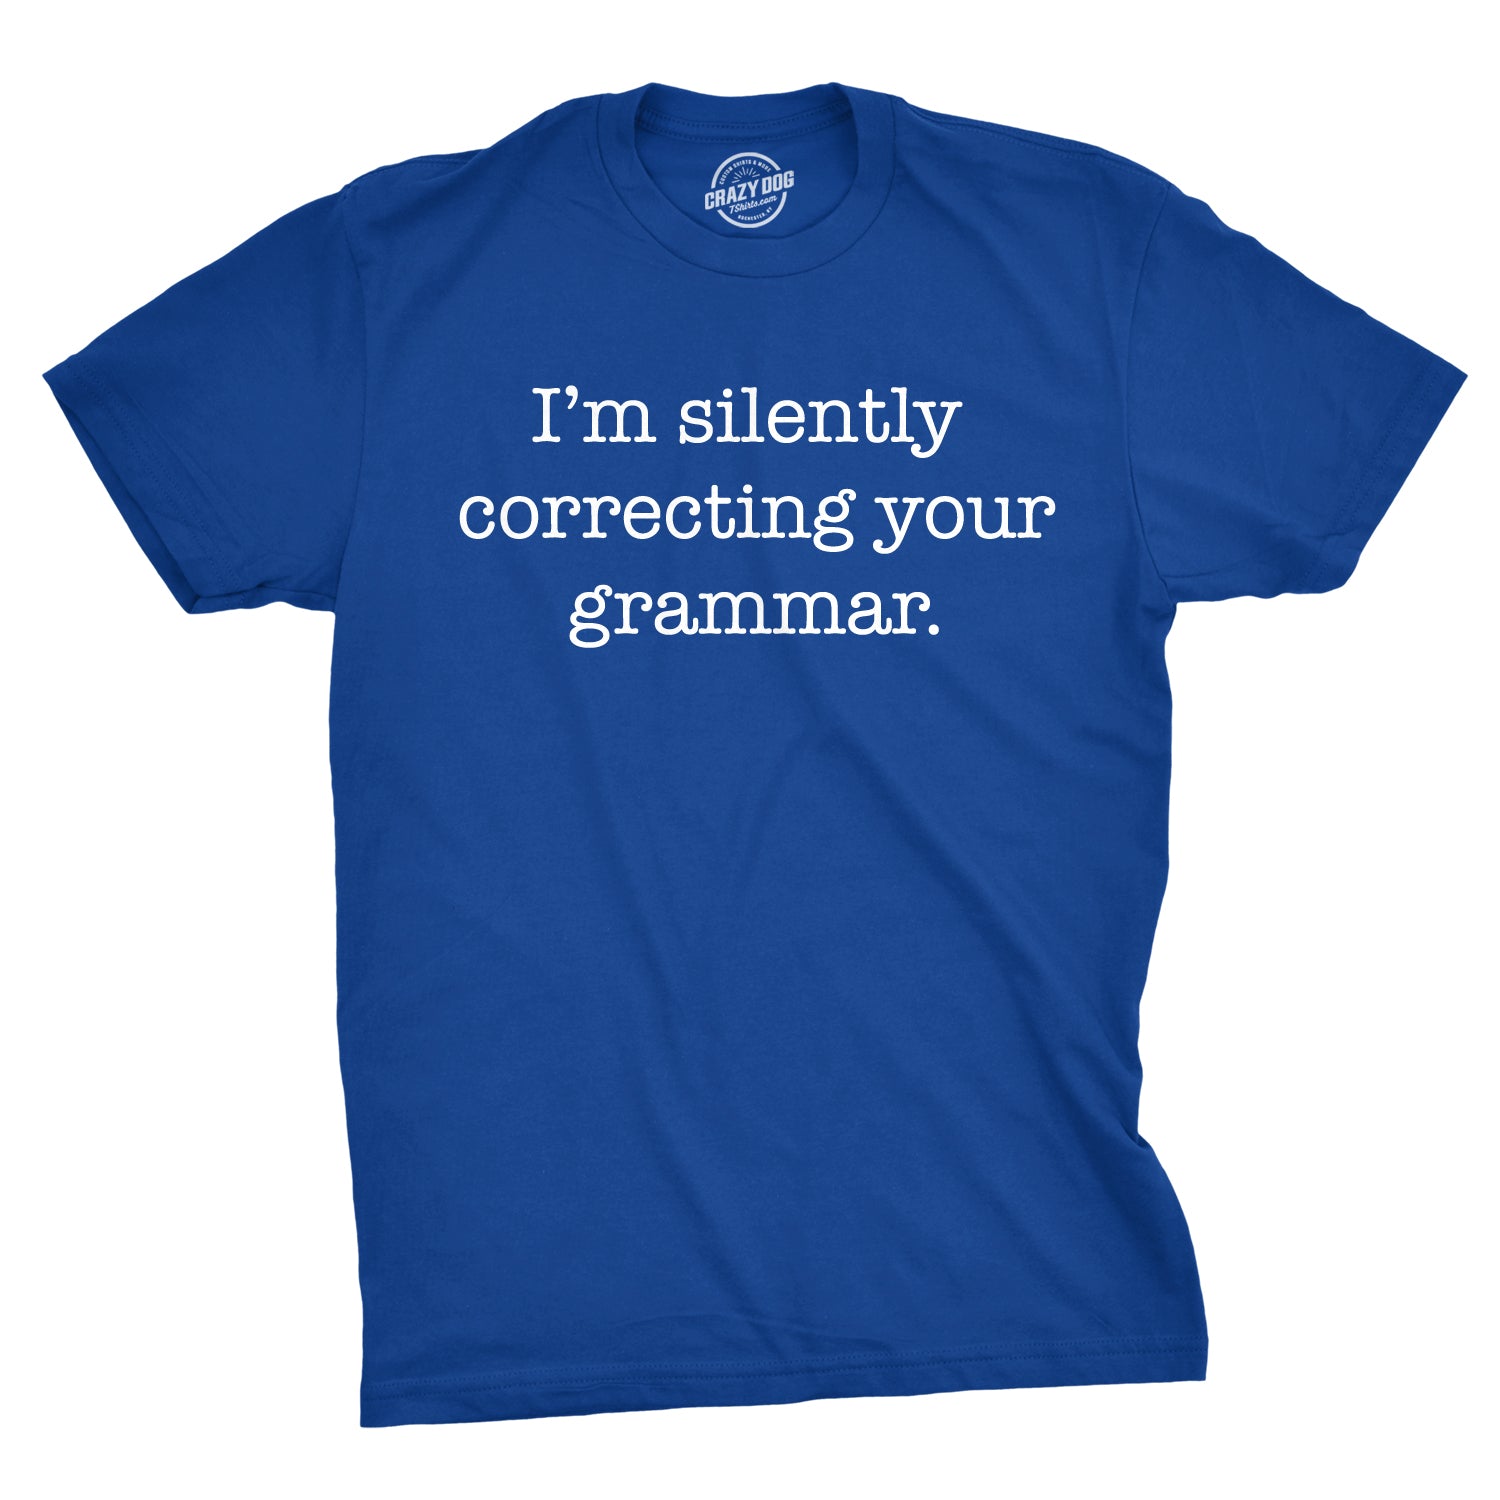 Funny I'm Silently Correcting Your Grammar Mens T Shirt Nerdy Nerdy Sarcastic Tee